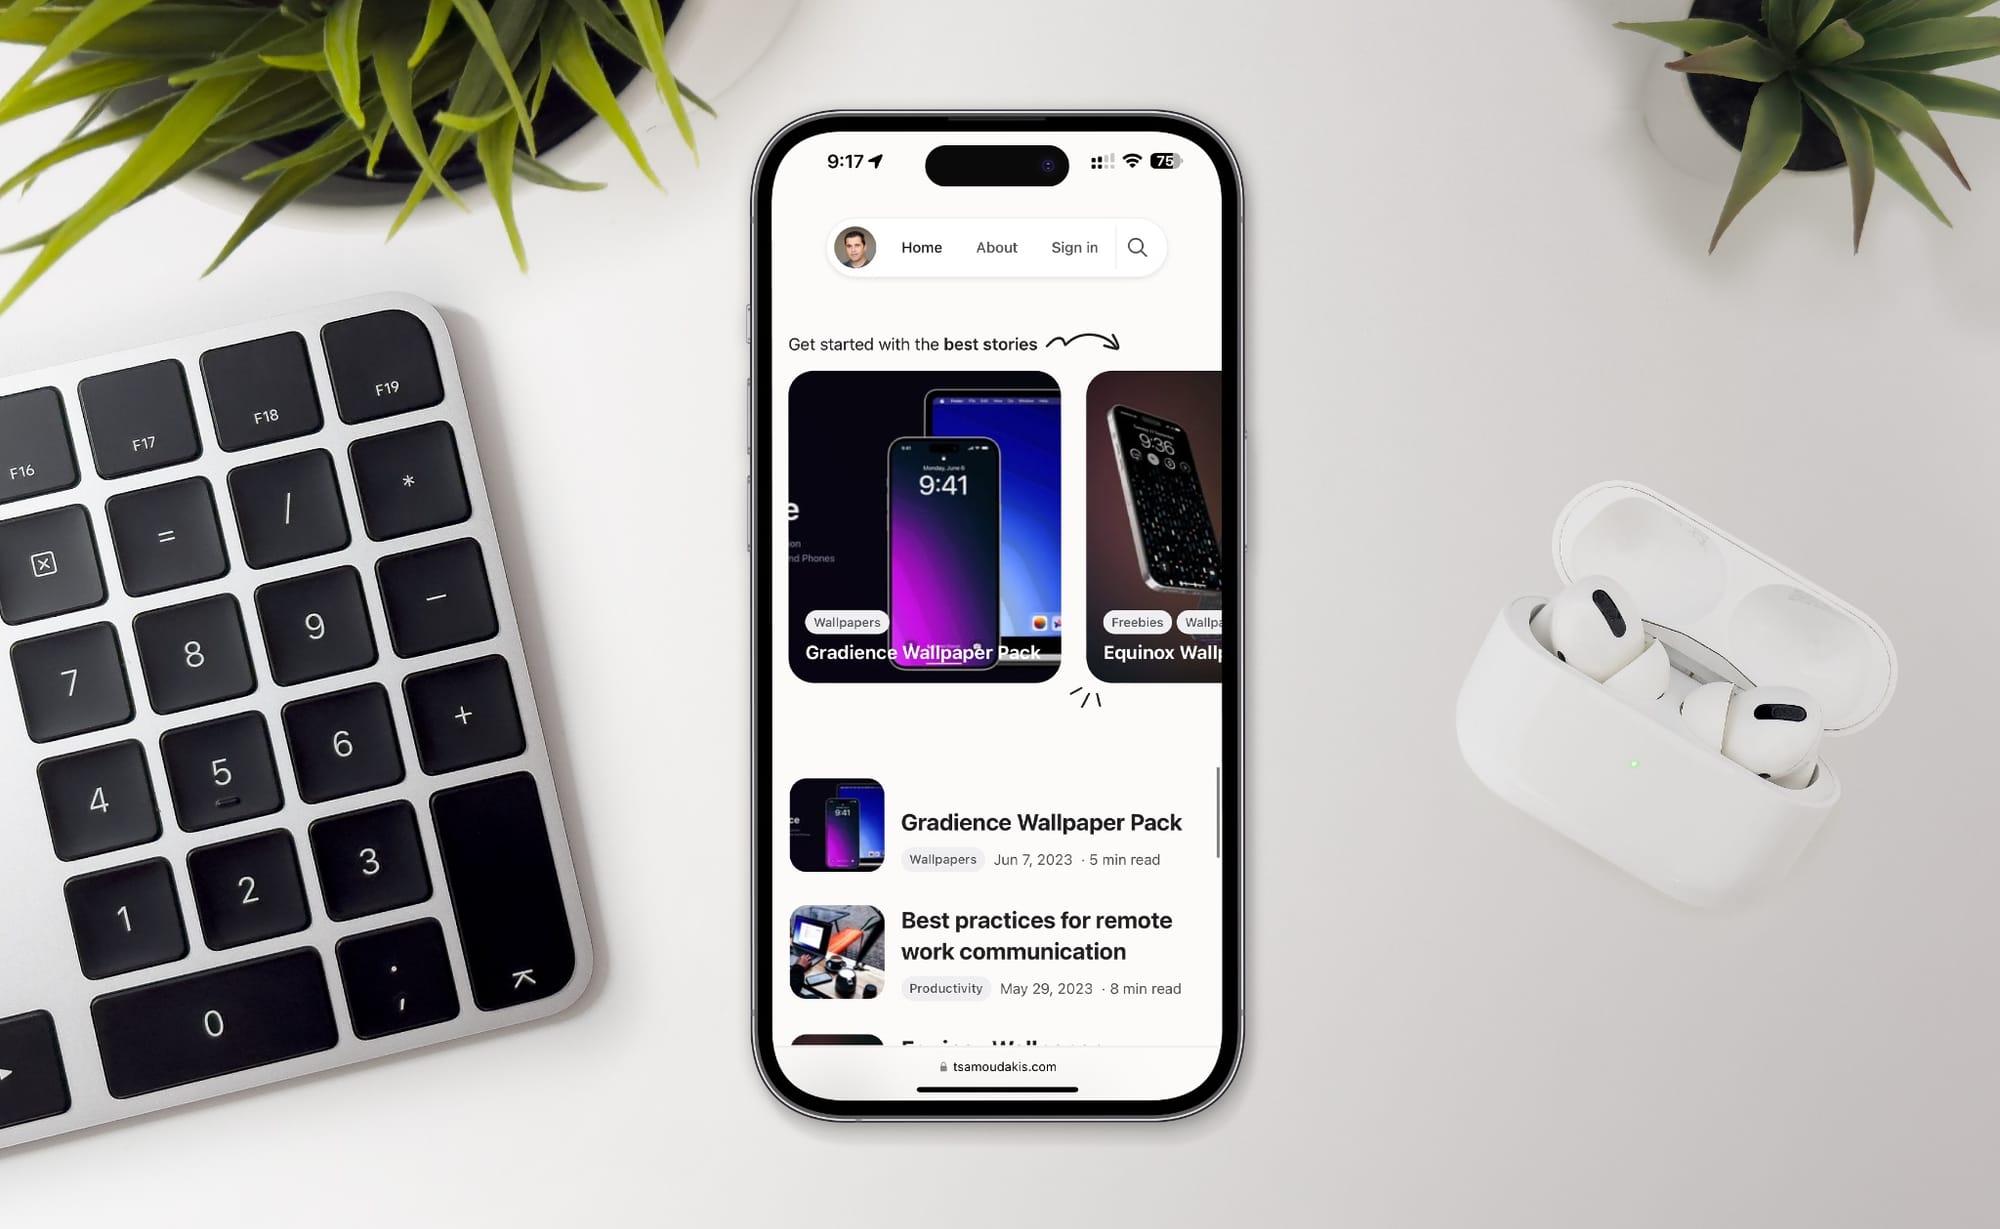 iPhone showing this website and surrounded by an Apple keyboard and AirPods